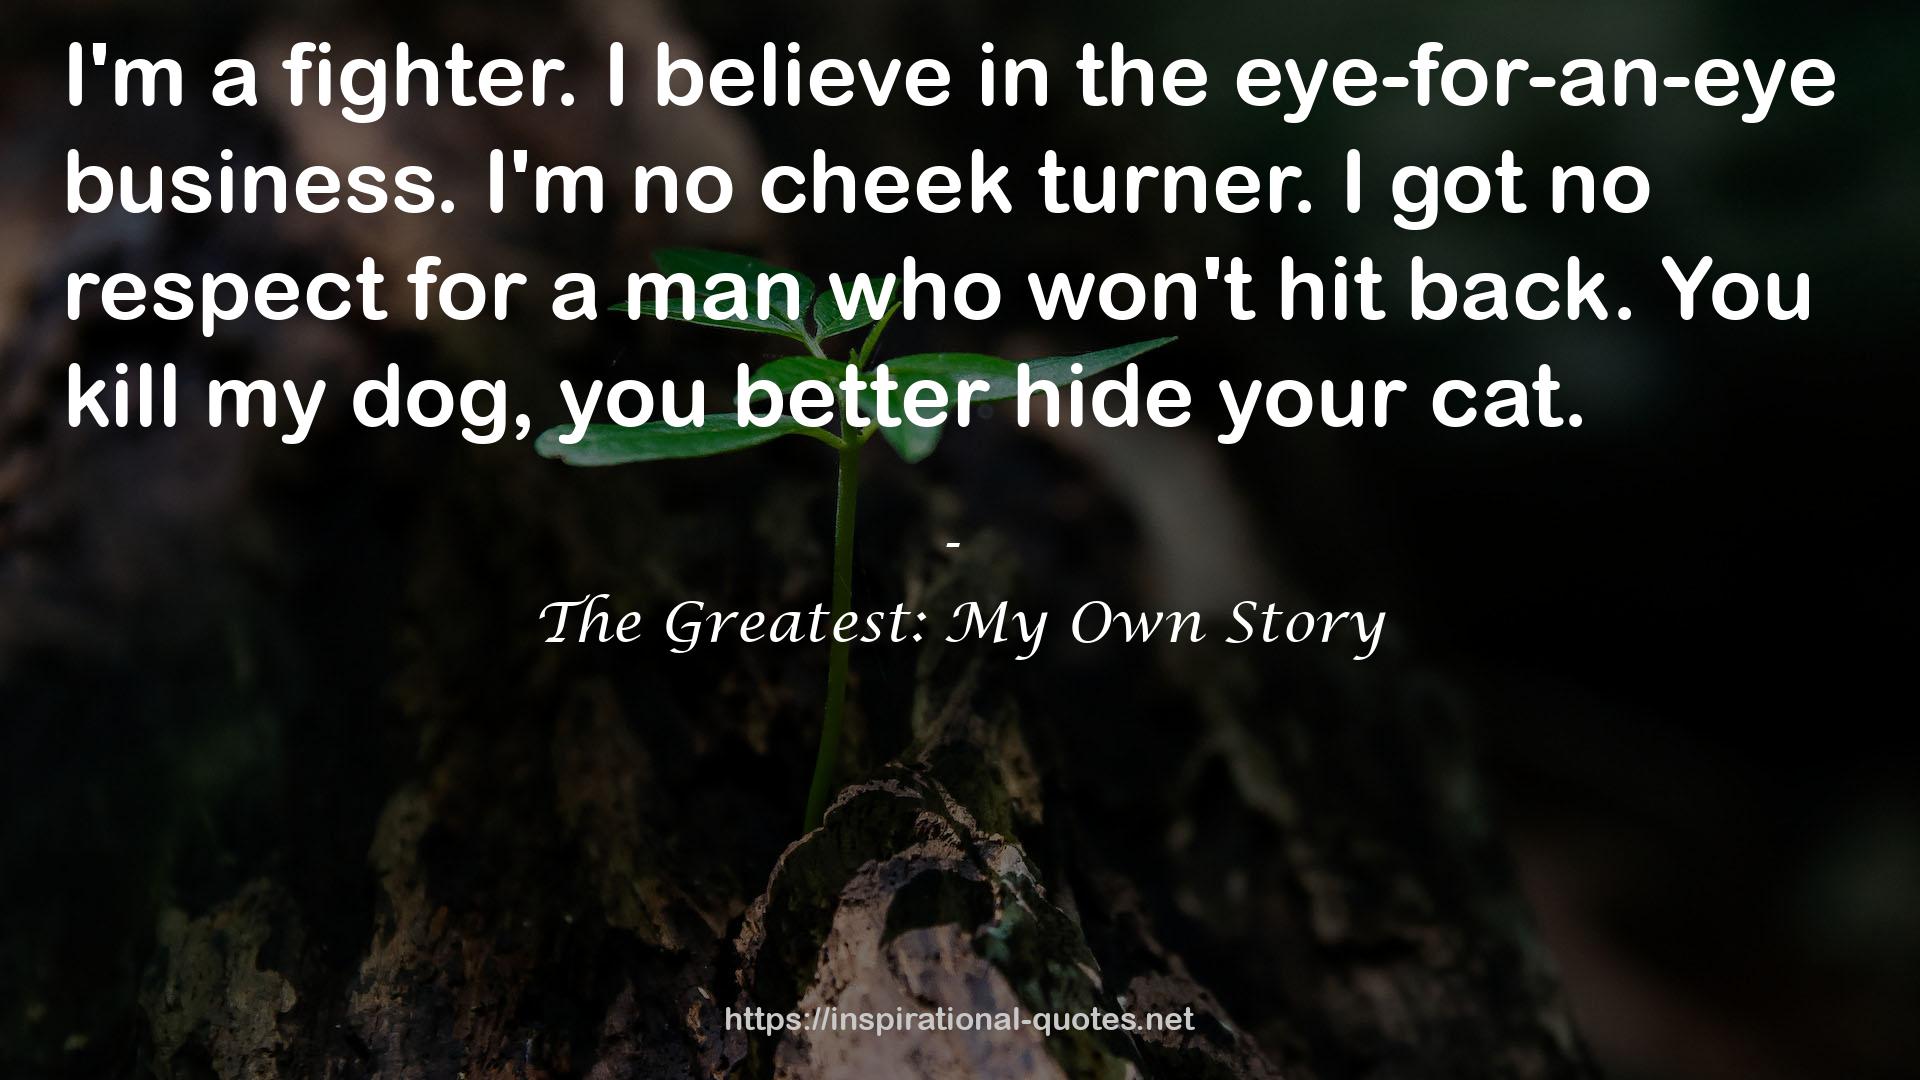 The Greatest: My Own Story QUOTES